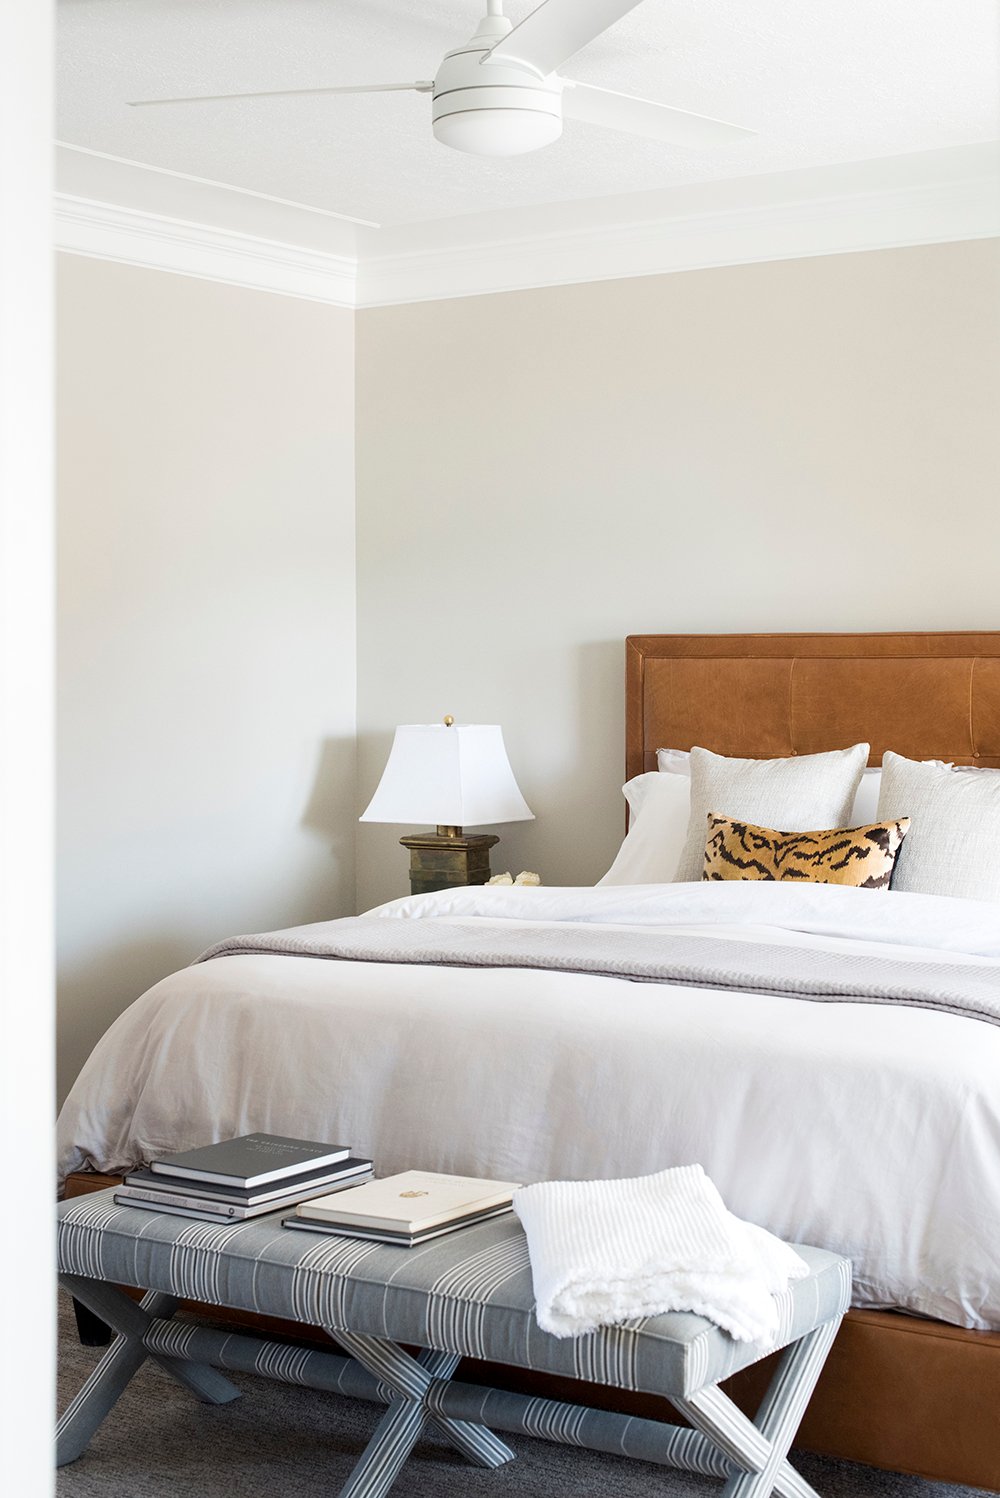 Timeless vs. Trendy: Choosing the Best Finishes & Furnishings for Your Home - roomfortuesday.com